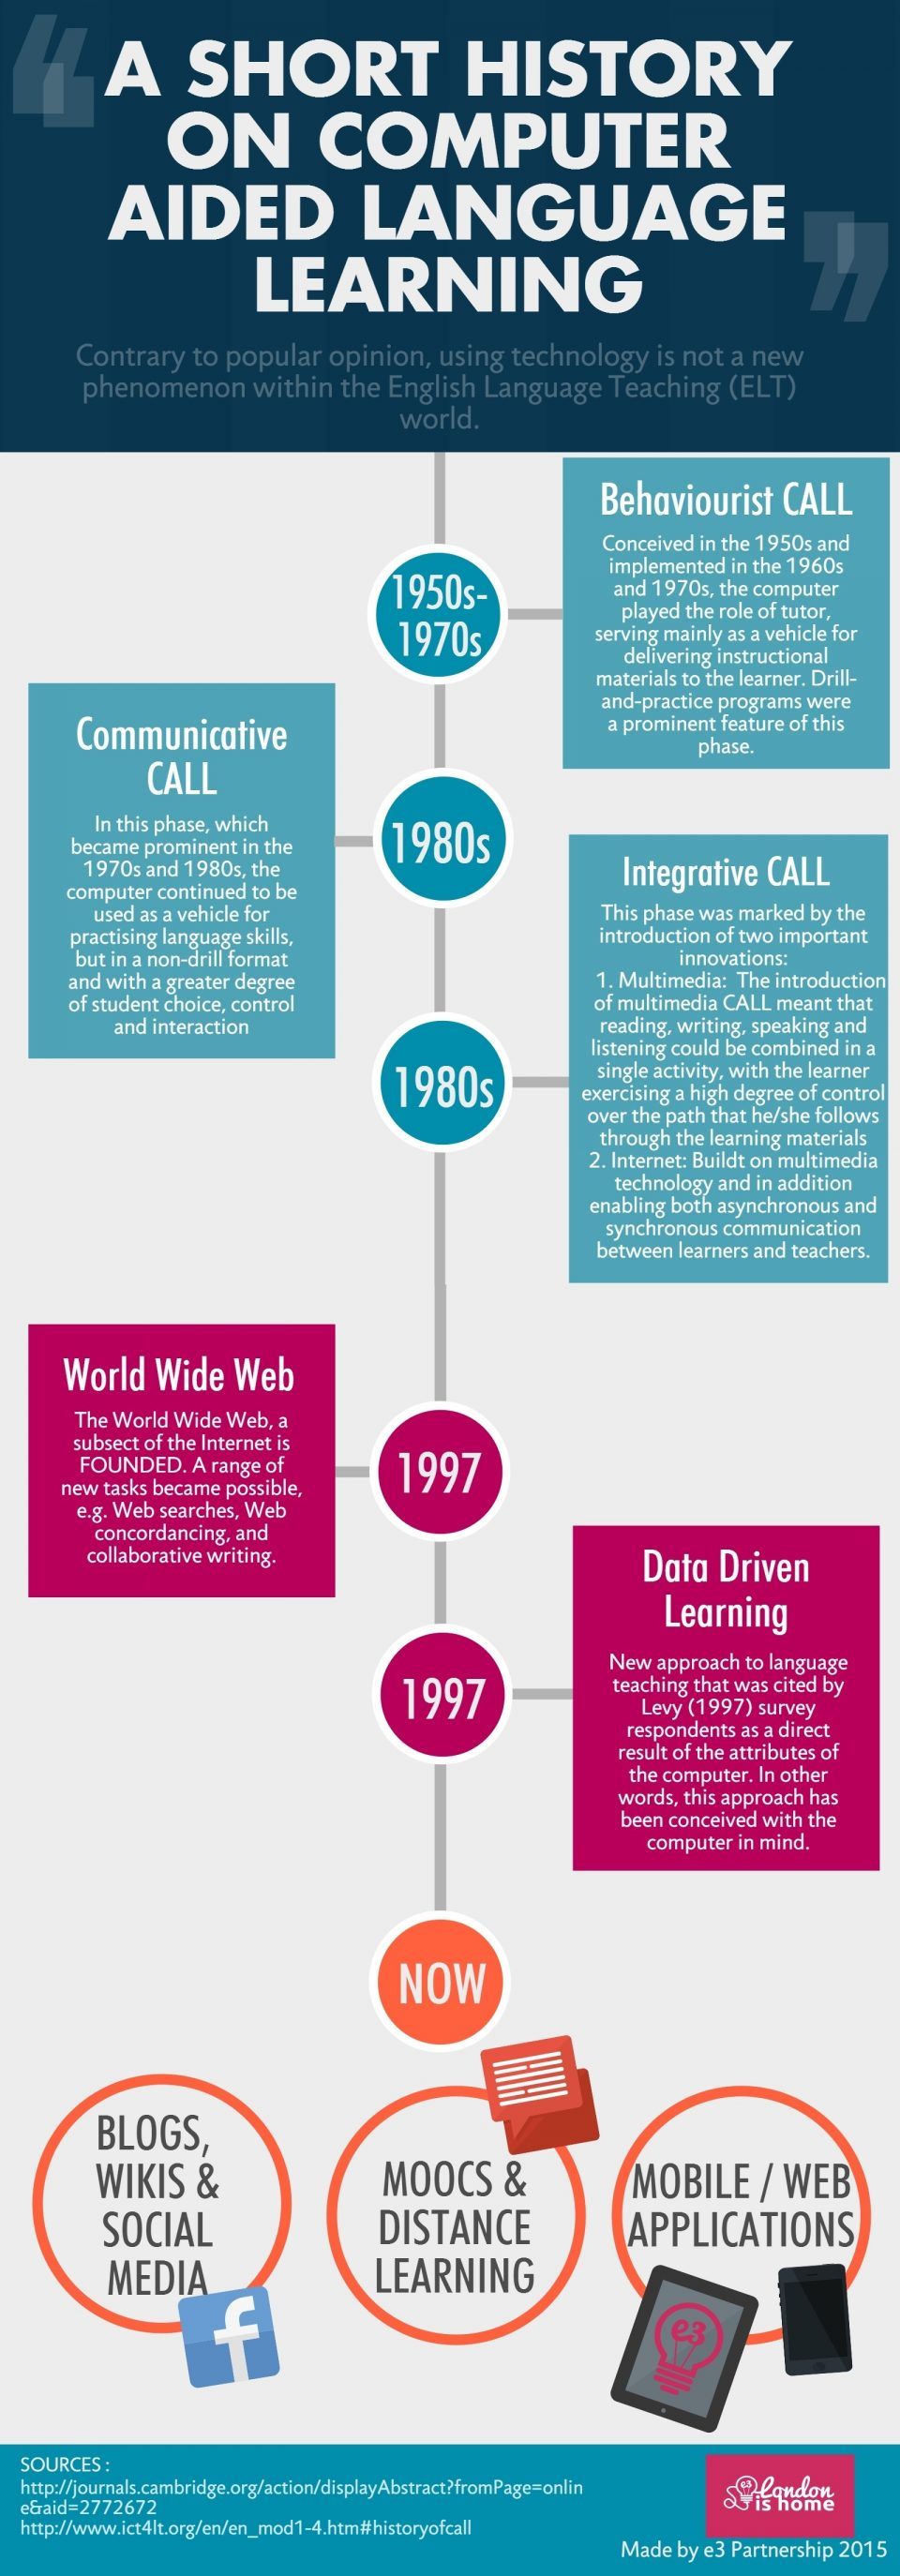 History of Computer Aided Language Learning Infographic